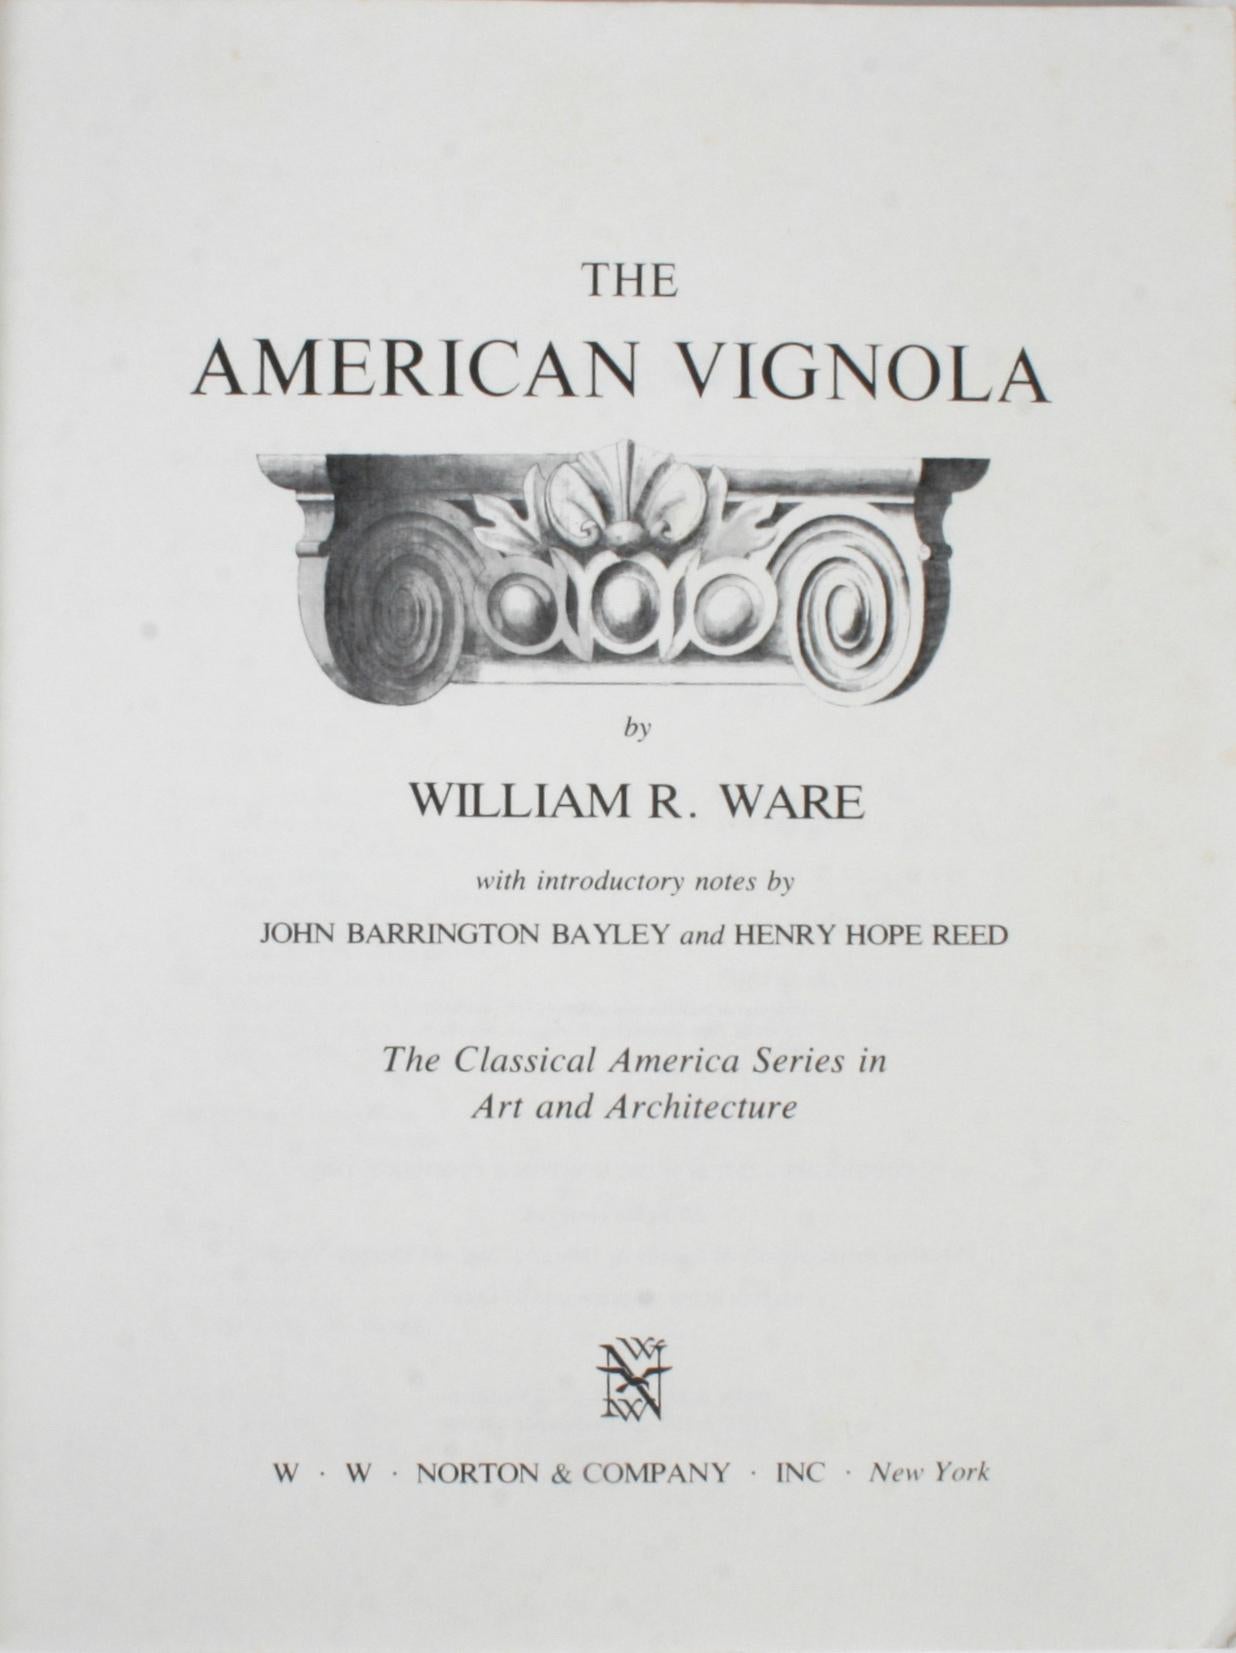 The American Vignola, a Guide to the making of classical architecture by William R. Ware. New York: W. W. Norton & Company Inc., 1977. First edition thus softcover. 124 pp. A guide to classical architecture that is one in a series of books titled